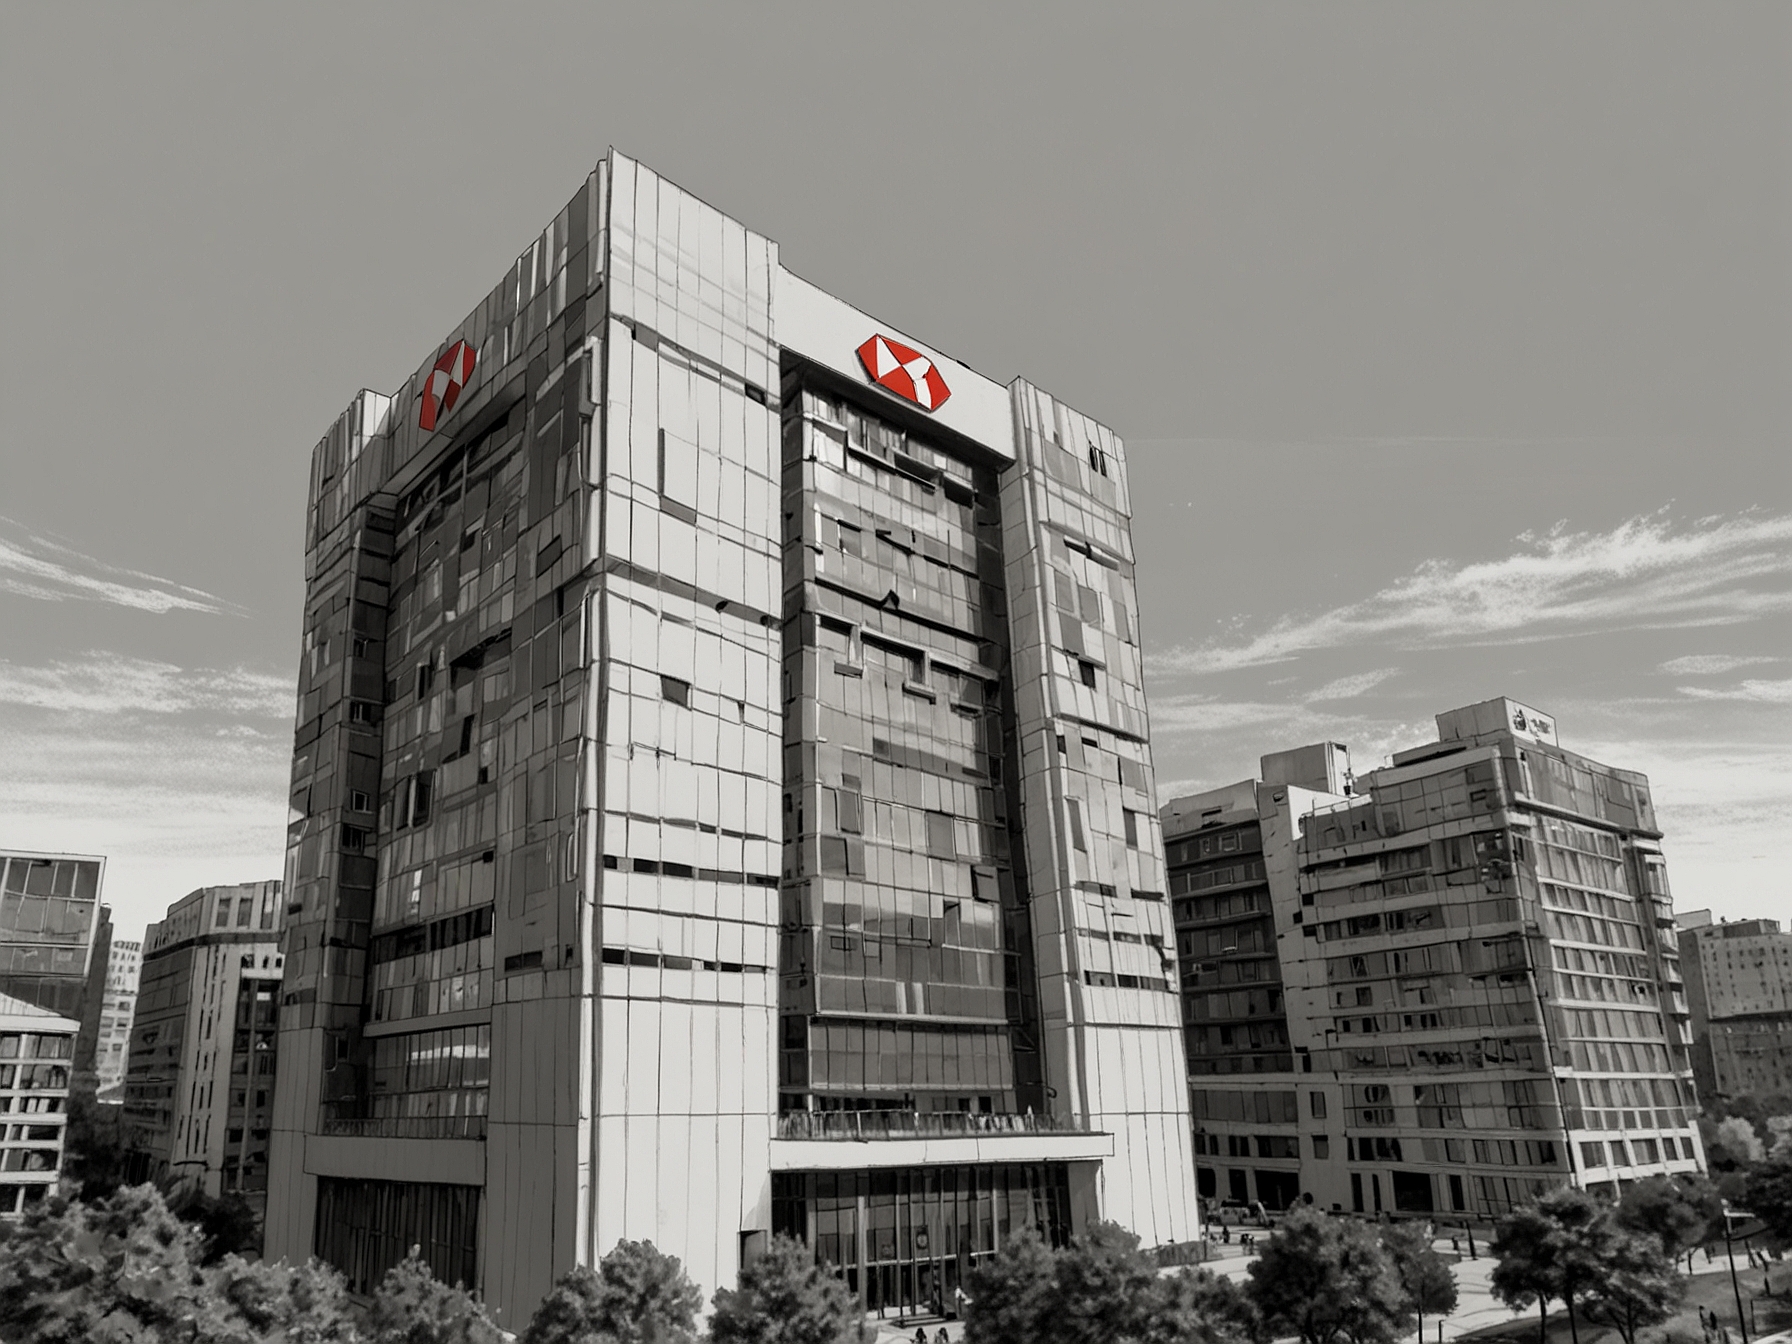 An image of HSBC's headquarters, symbolizing the global reach of the bank as it strategizes to streamline operations through the sale of its German fund administration and custody units.